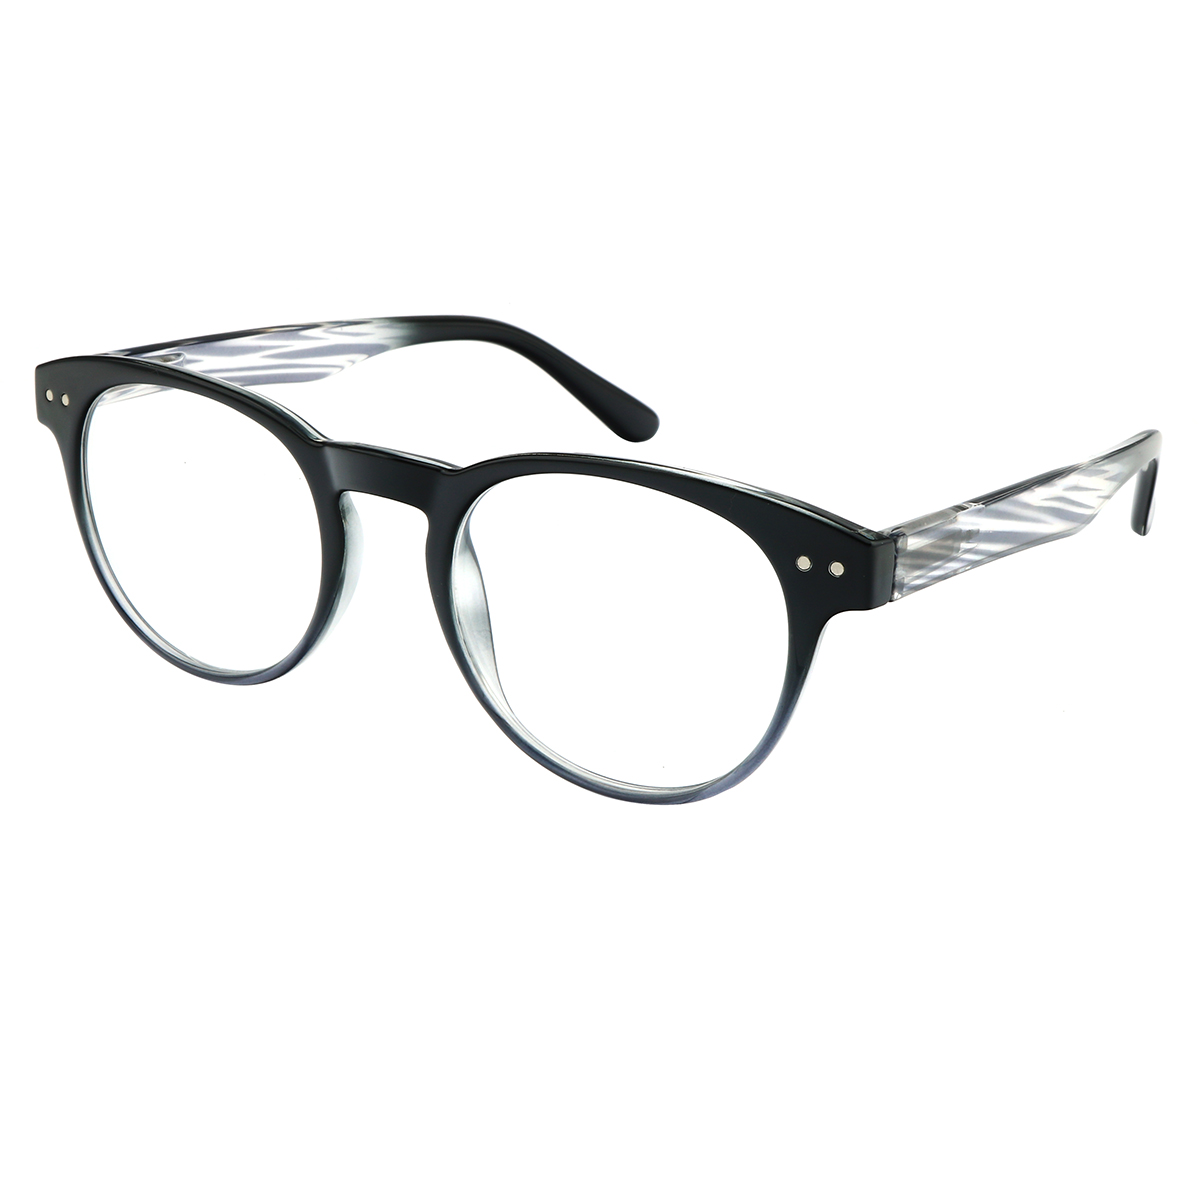 Thrace - Round Transparent Reading Glasses for Women